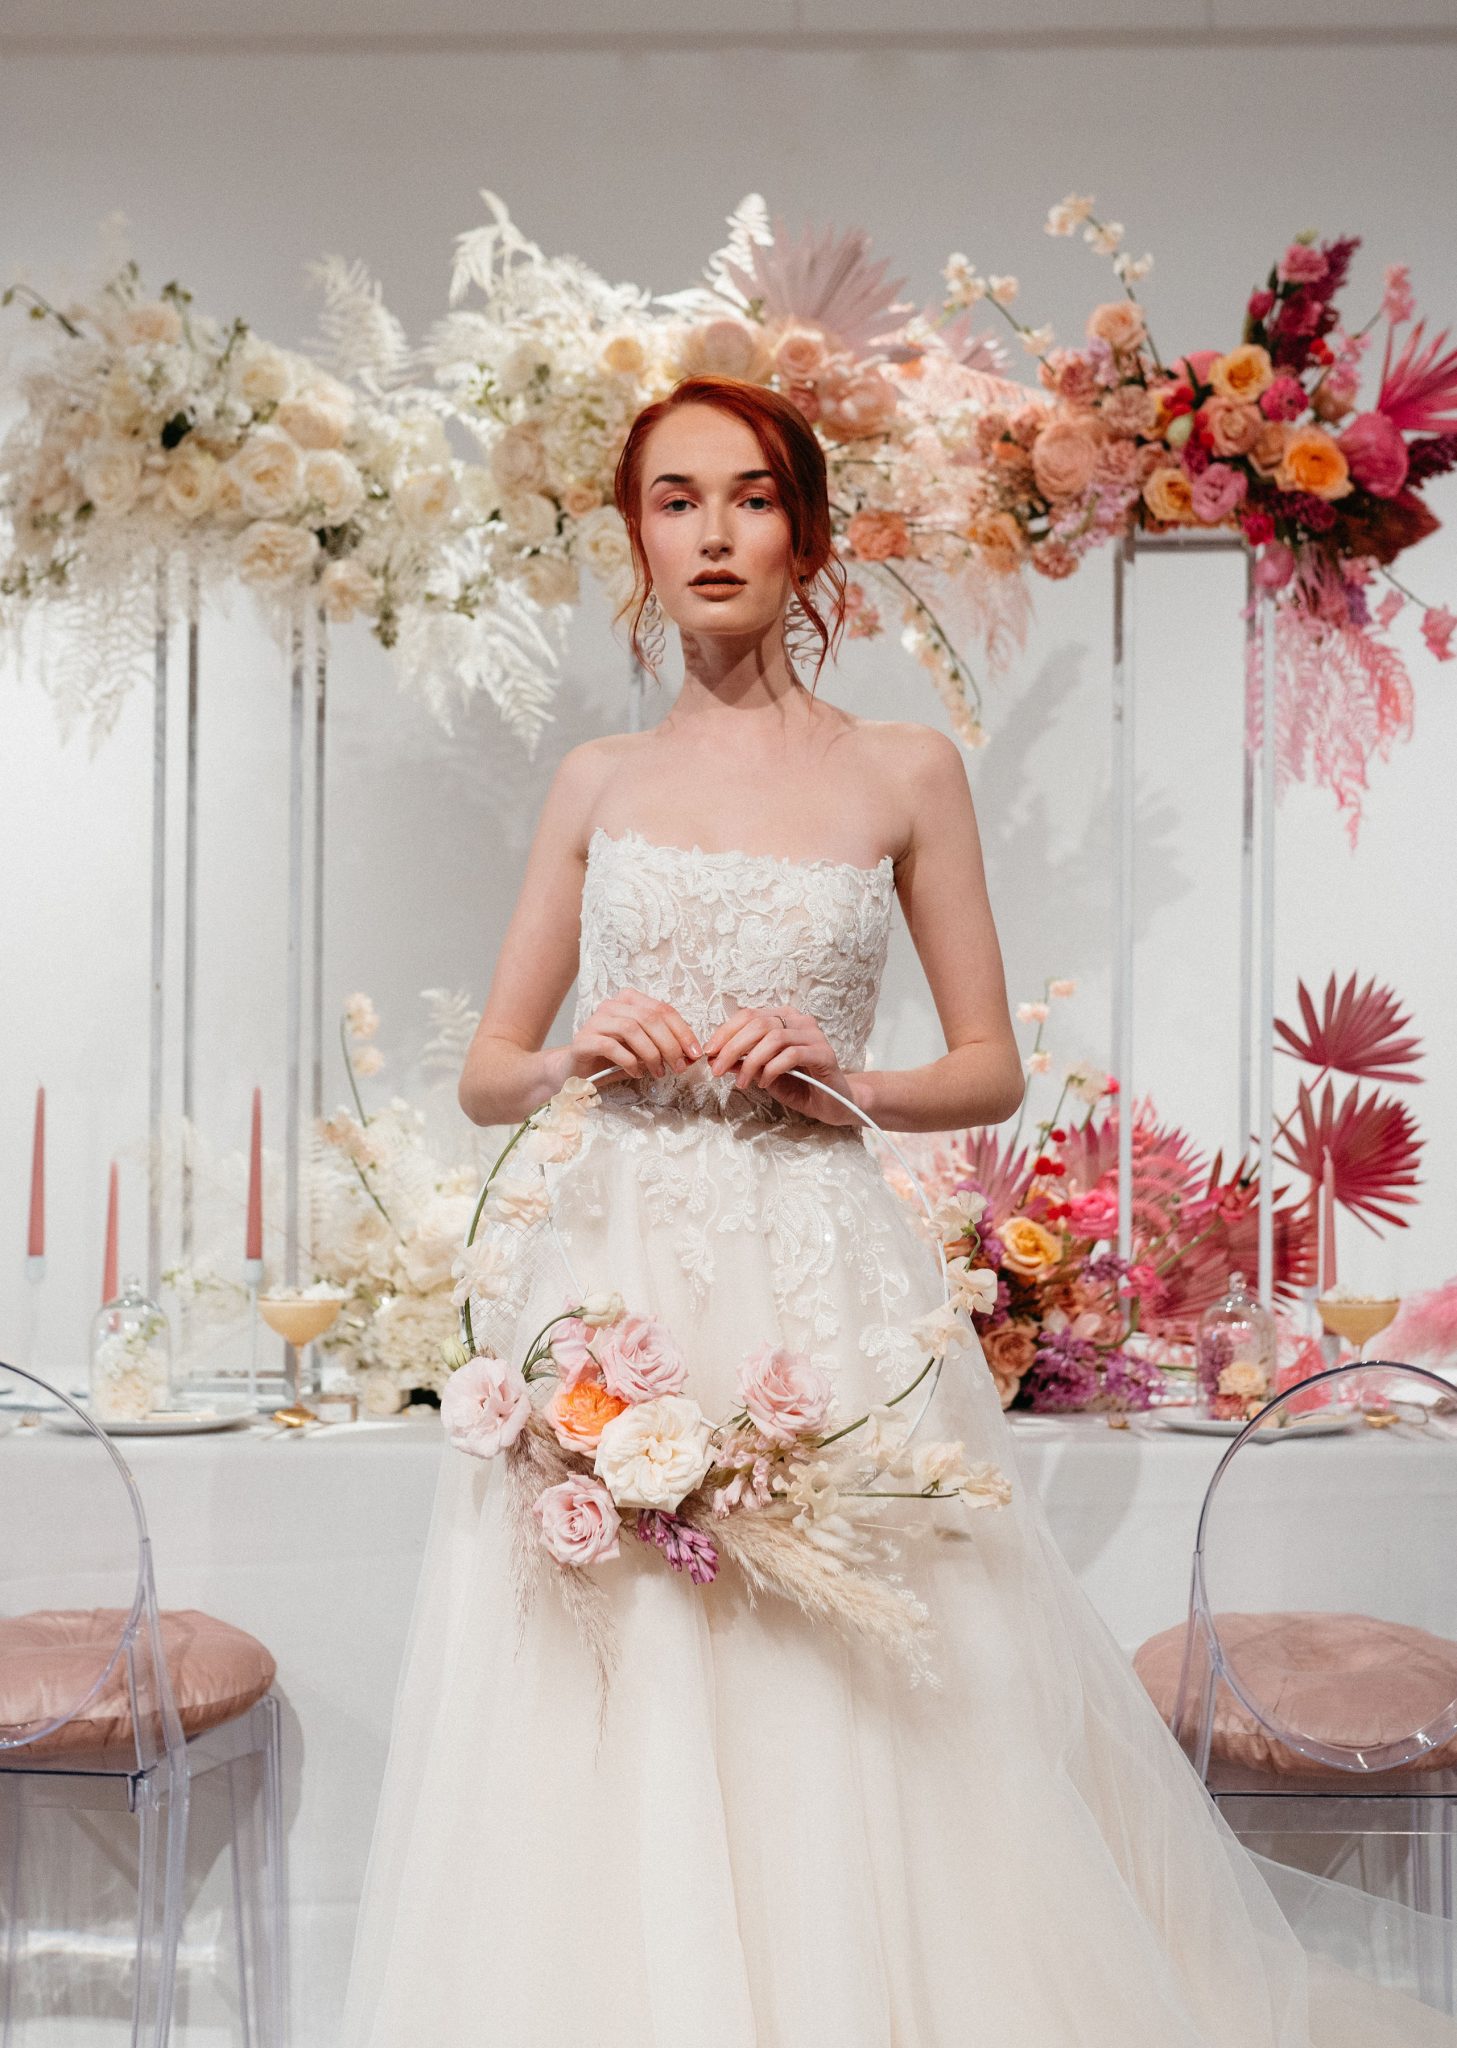 Bride poses in front of an ombre floral installation holding a floral decorated bridal hoop